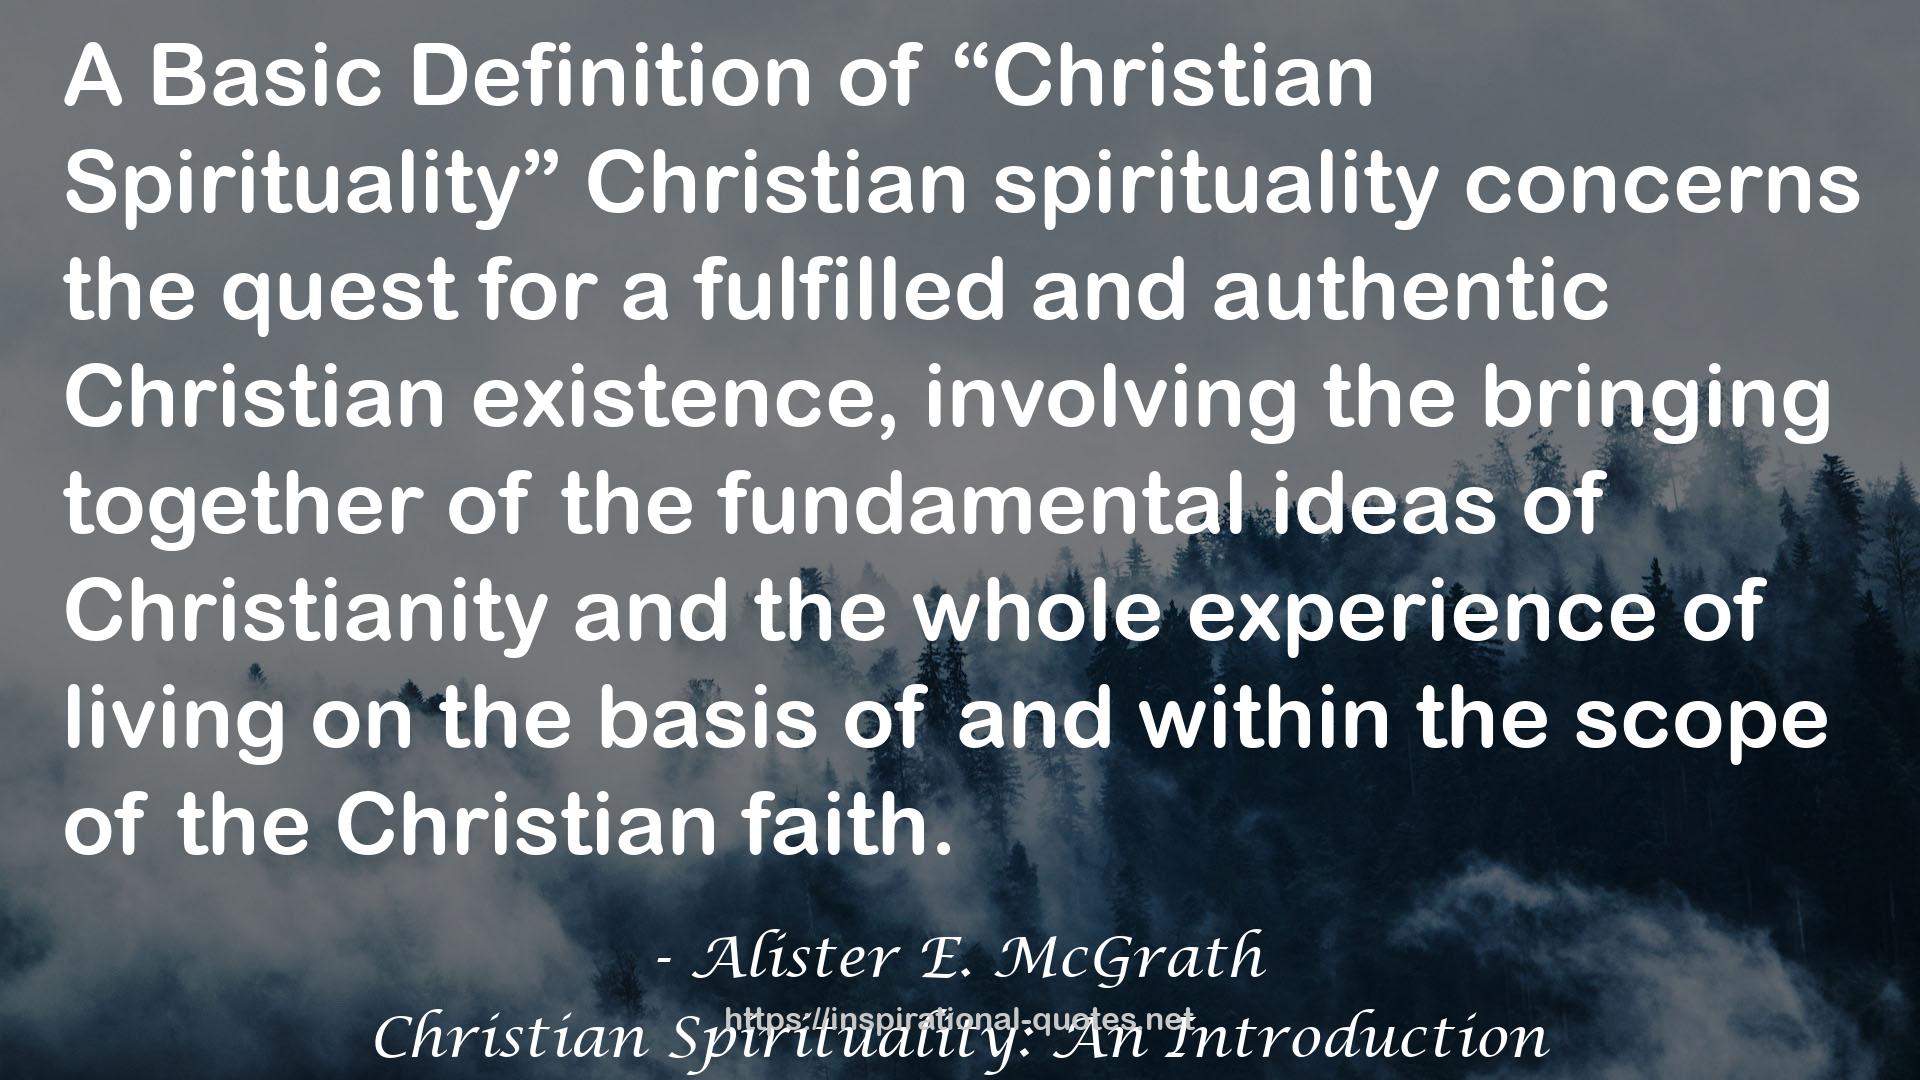 Christian Spirituality: An Introduction QUOTES